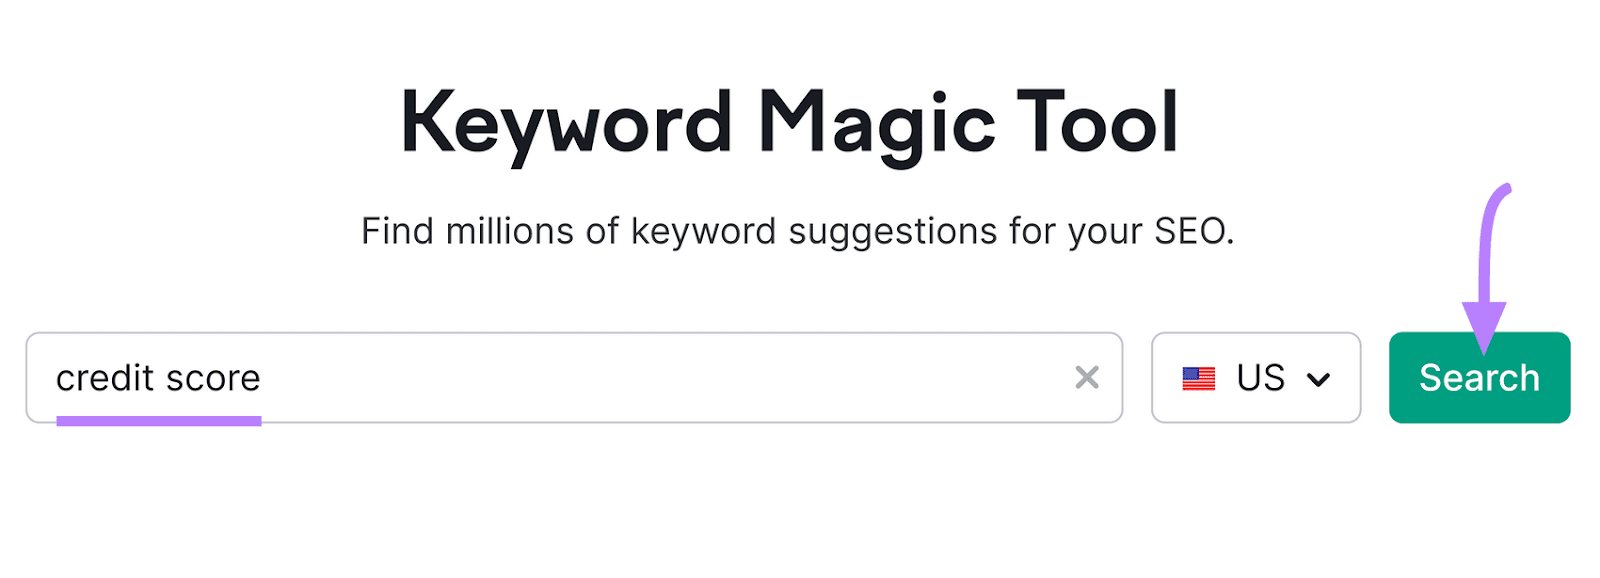 "credit score" entered into the Keyword Magic Tool search bar